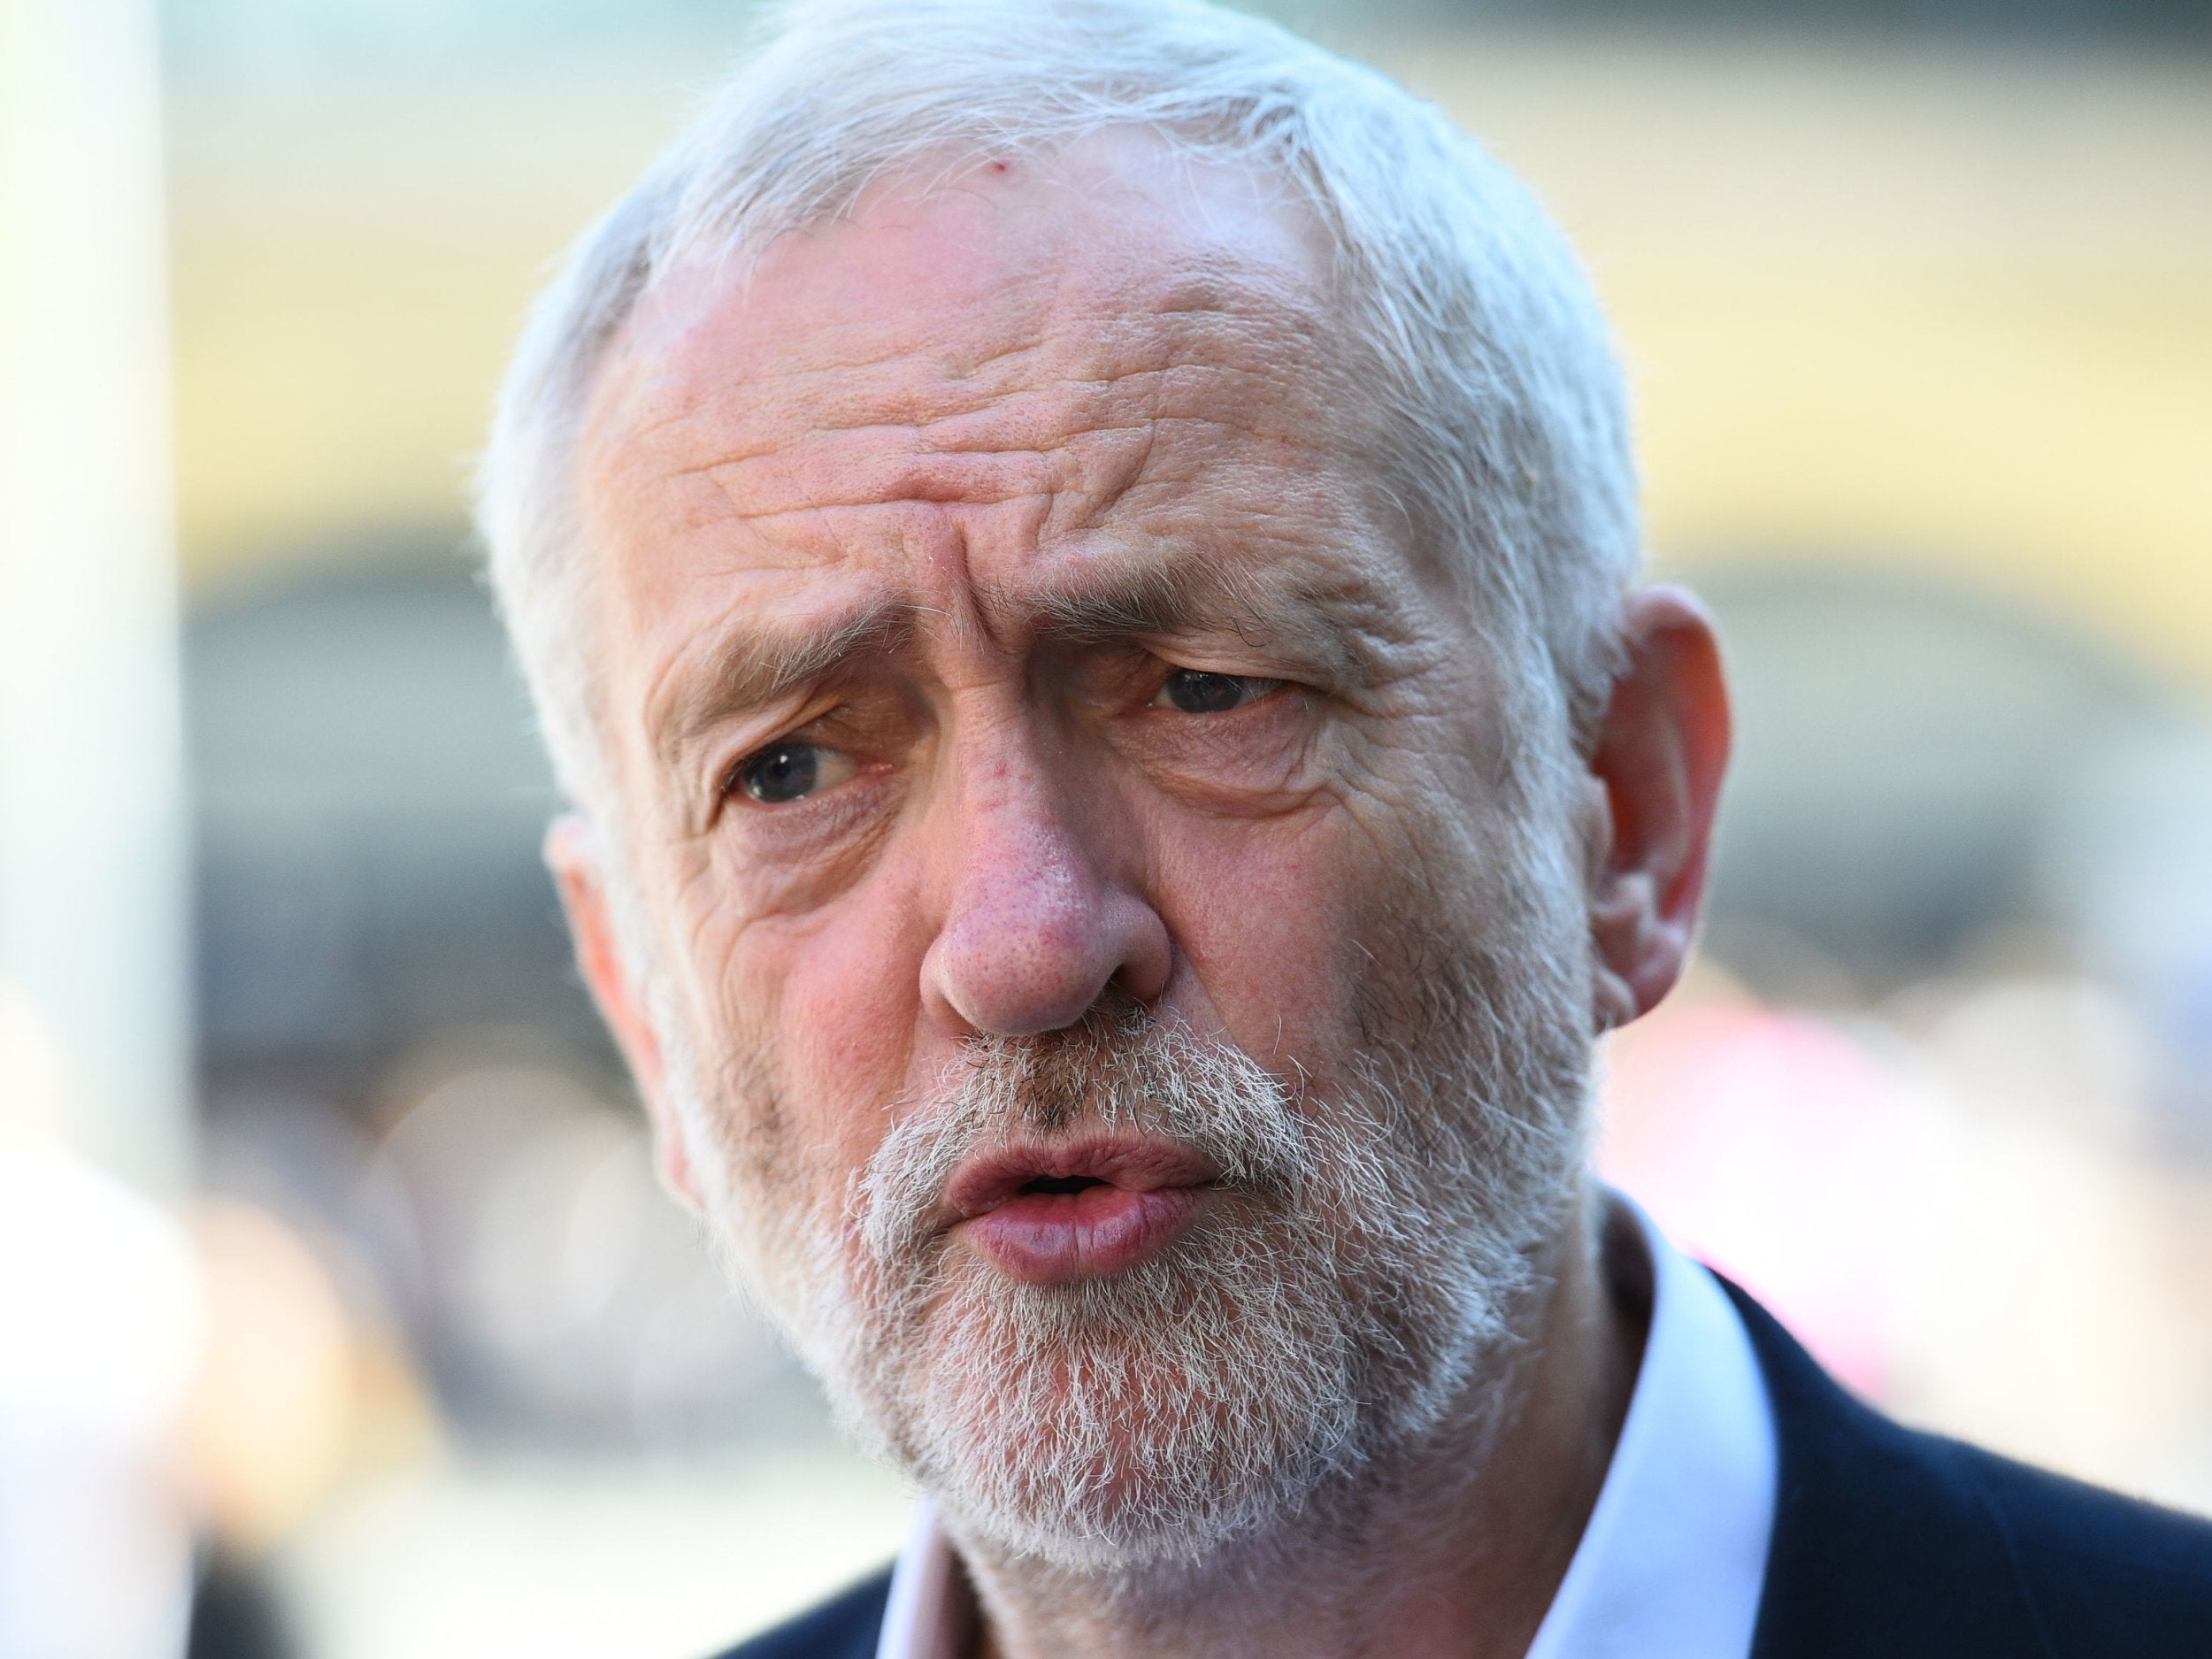 Jeremy Corbyn has come under pressure to amend the party's new code of conduct after criticism from Jewish groups